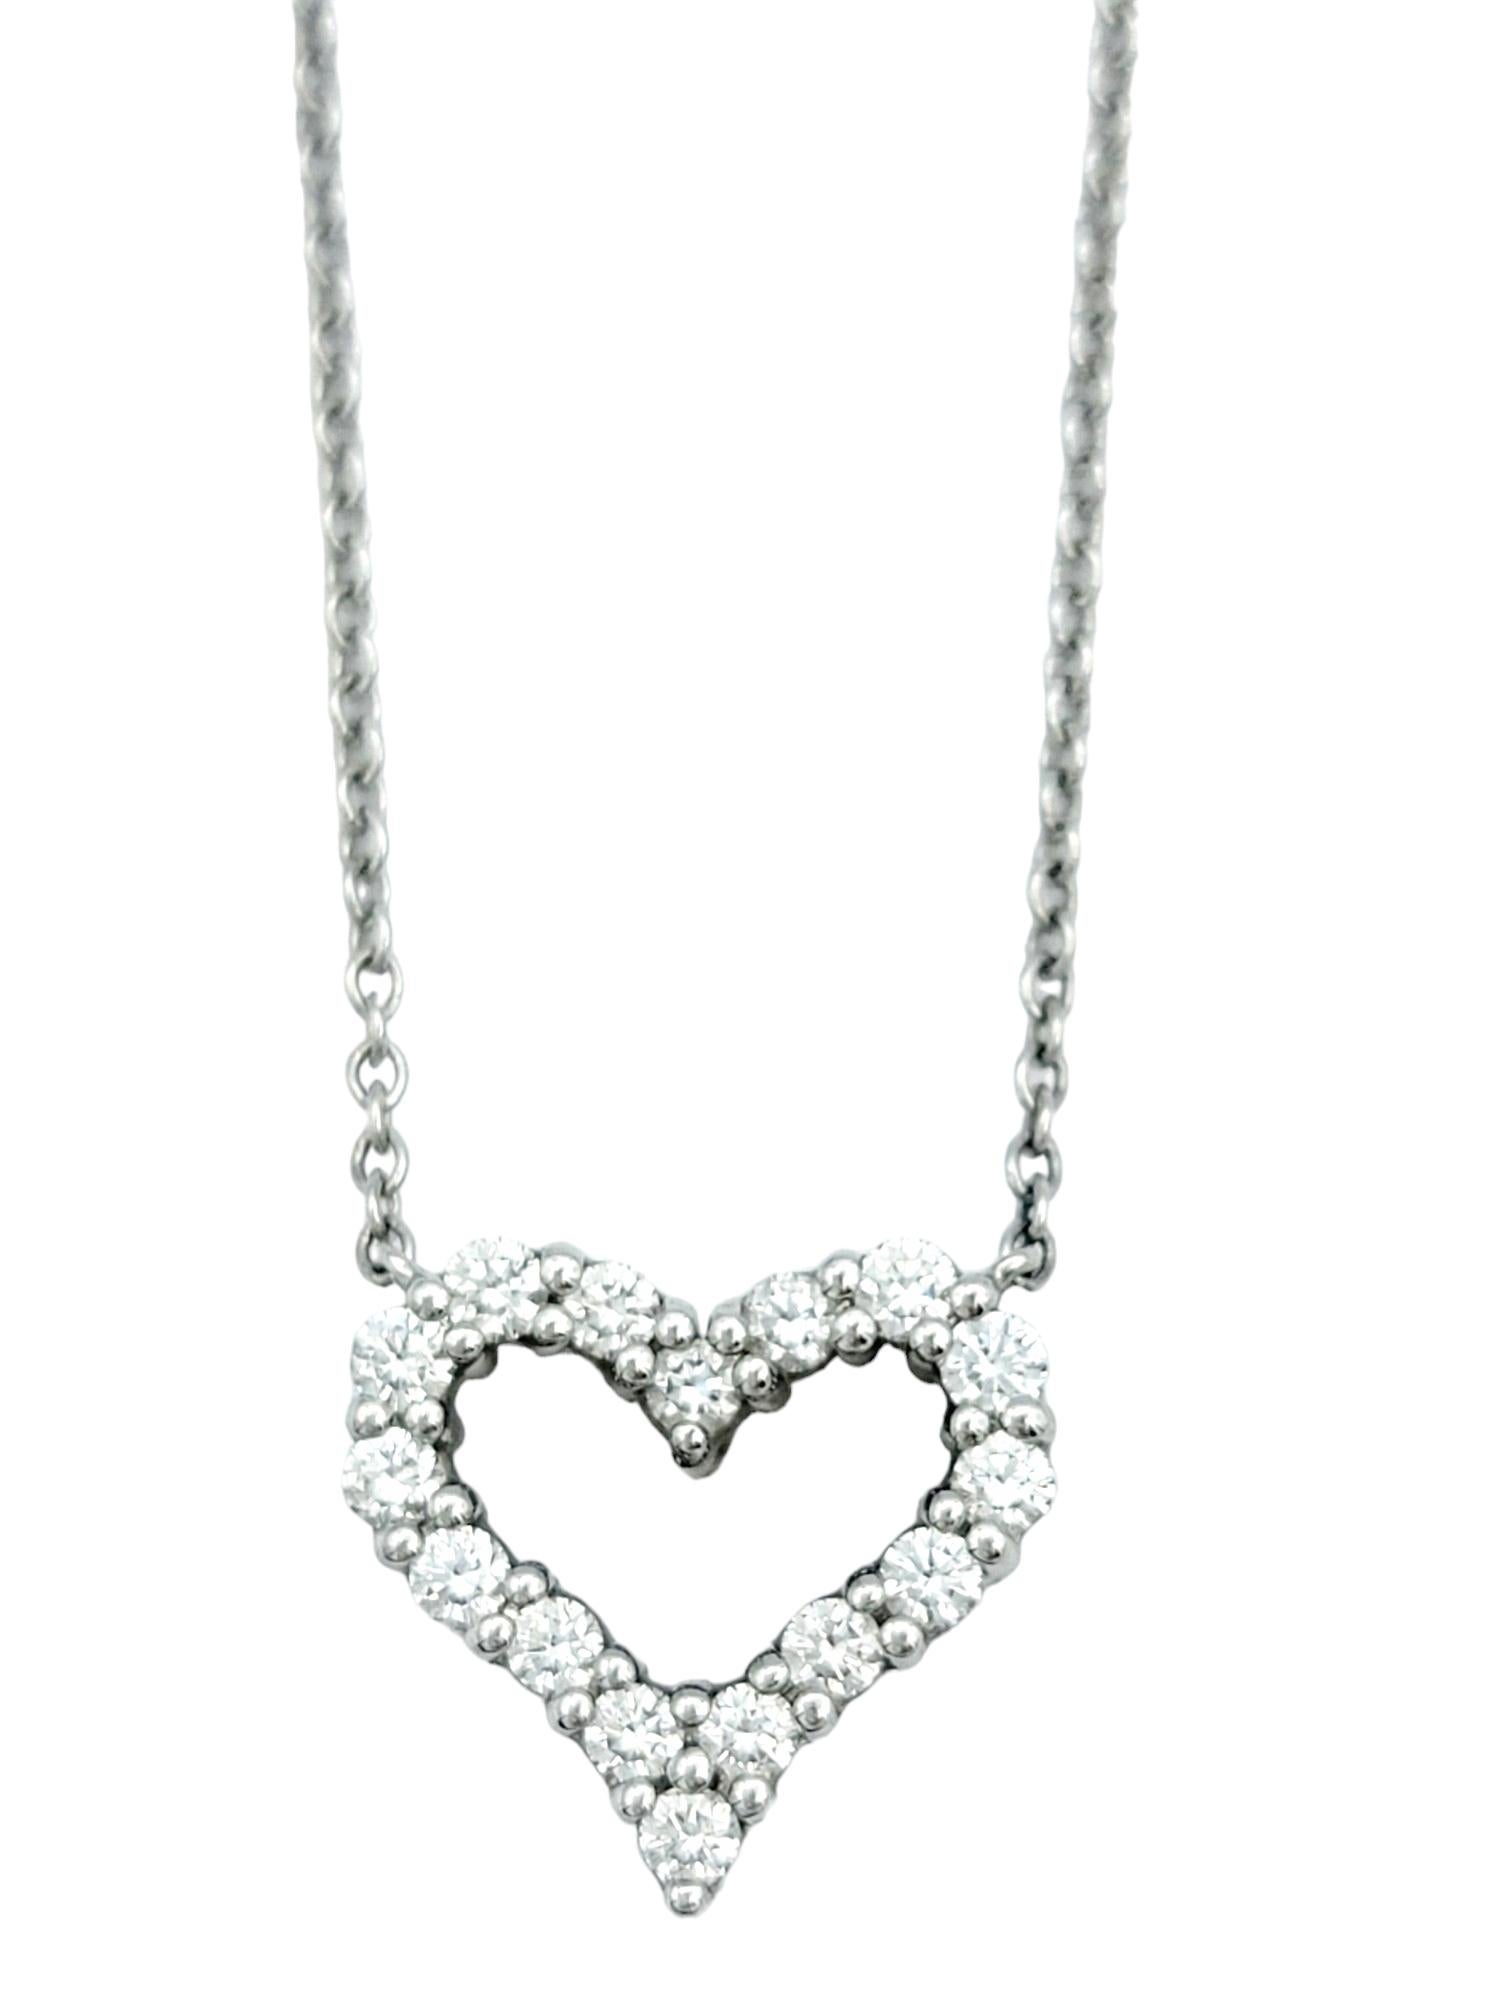 This petite Tiffany & Co. pendant necklace, set in polished platinum, is an embodiment of timeless elegance. The pendant takes the form of an open heart, adorned with a mesmerizing array of diamonds, adding a touch of brilliance to its delicate